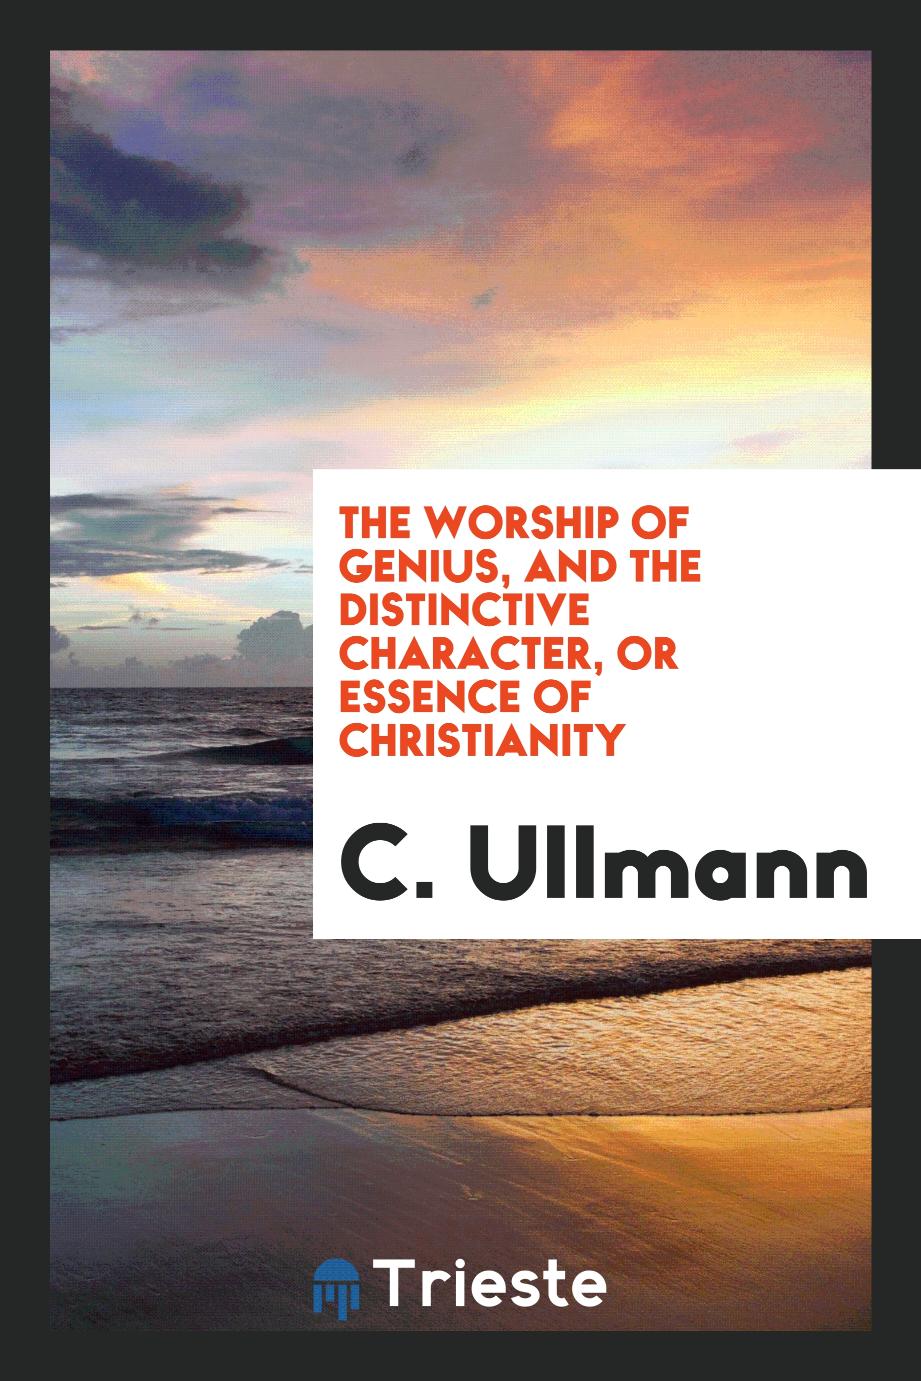 The Worship of Genius, and The Distinctive Character, or Essence of Christianity